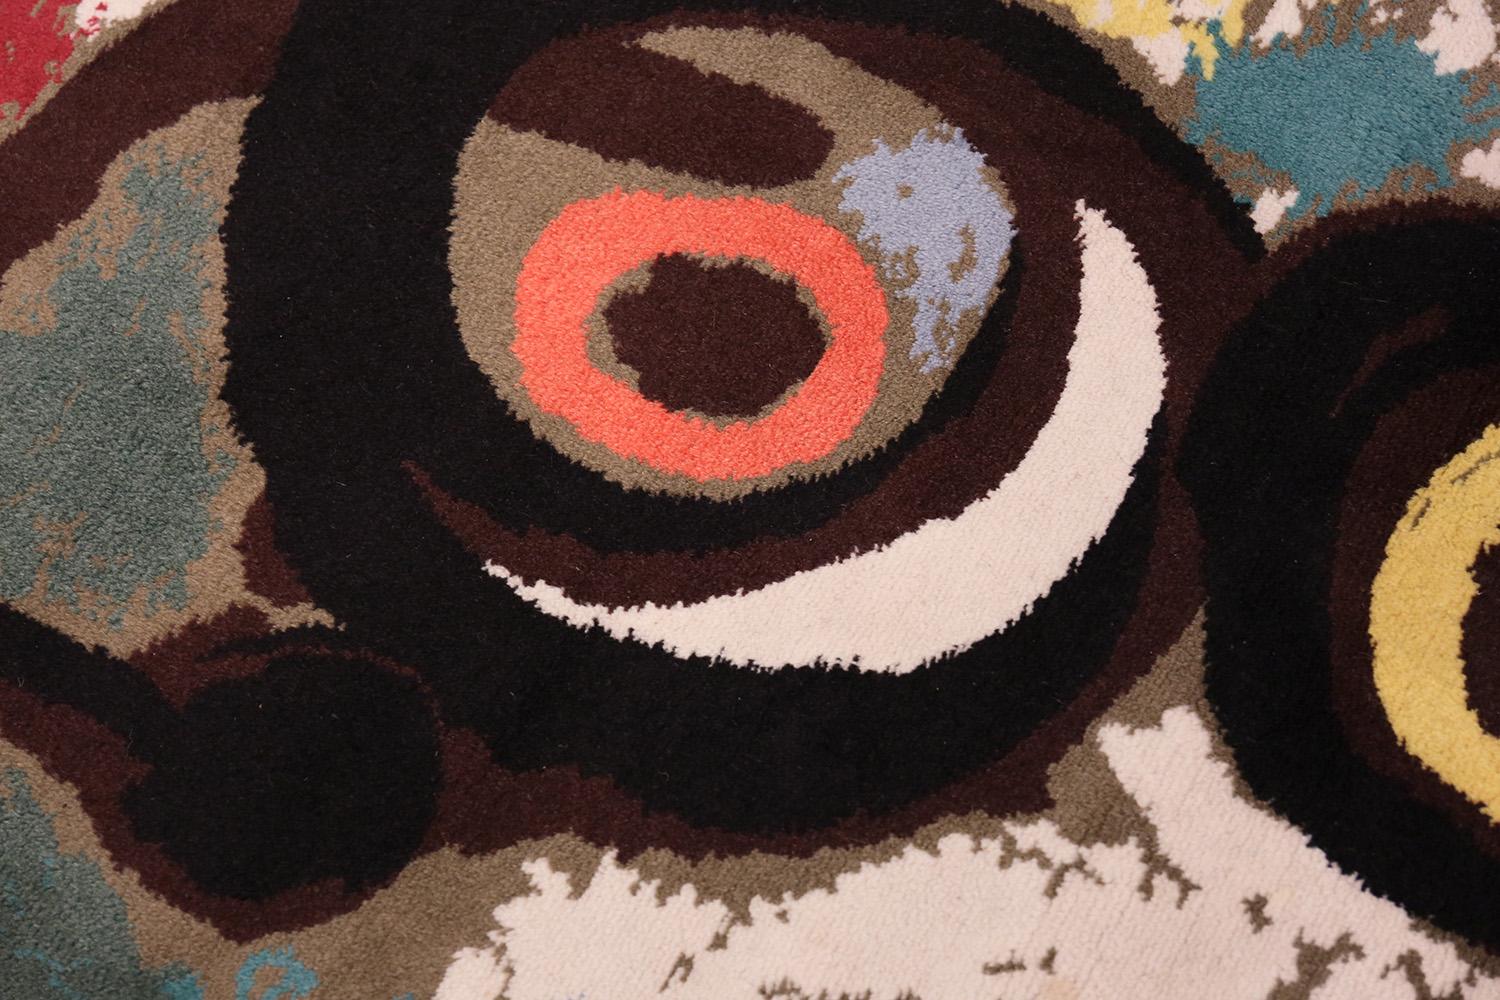 Beautifully Artistic Vintage Art rug based on Joan Miro, country Of origin / rug type: Vintage Scandinavian rug, date: circa mid-20th century. Size: 4 ft 10 in x 3 ft 5 in (1.47 m x 1.04 m)

Artist Joan Miro was one of the pioneers of the Surrealist